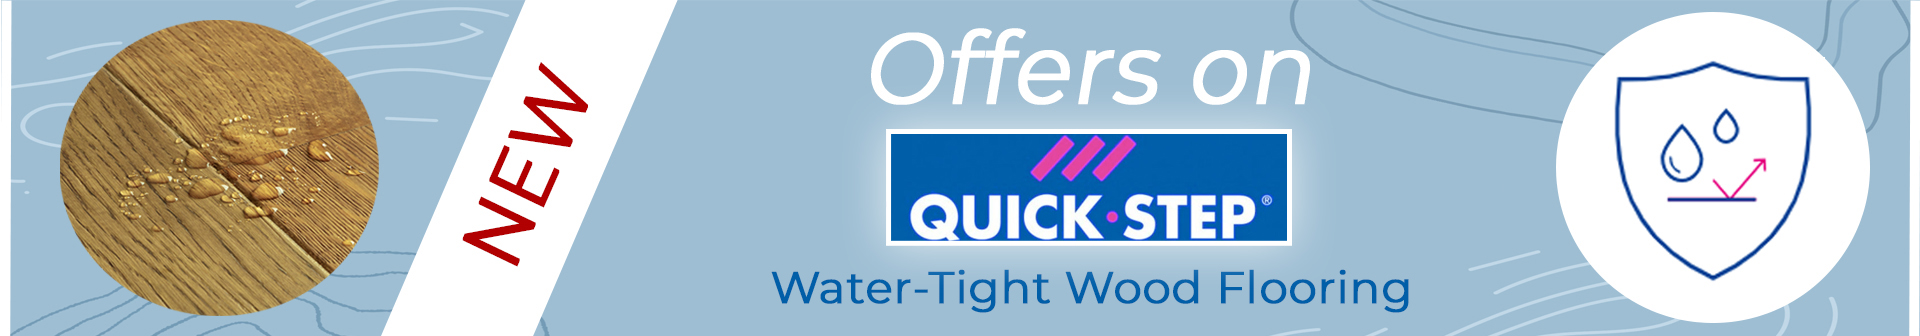 Quick-Step-Water-Tight-Banner-06-04-24.jpg